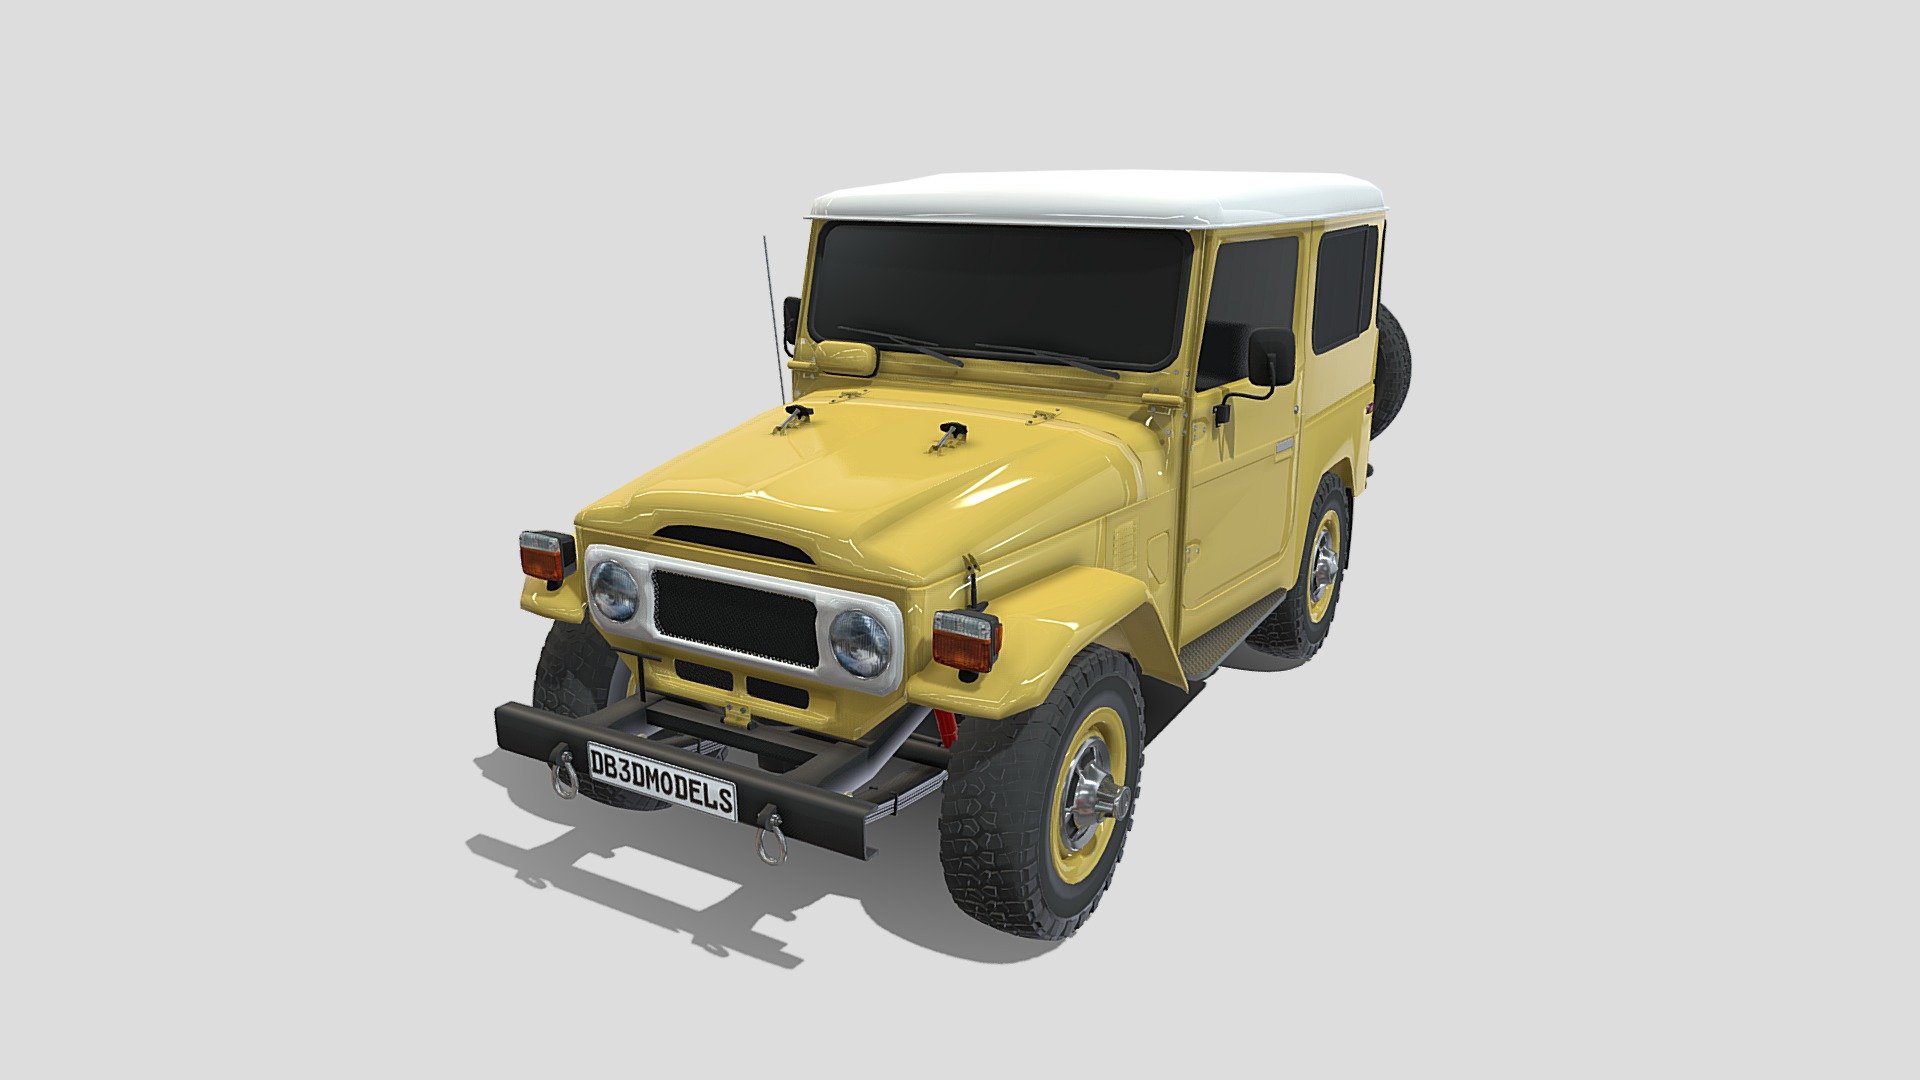 Highly detailed Generic 4x4 3d model rendered with Cycles in Blender, as per seen on attached images. 
The 3d model is scaled to original size in Blender.

File formats:
-.blend, rendered with cycles, as seen in the images;
-.obj, with materials applied;
-.dae, with materials applied;
-.fbx, with materials applied;
-.stl;

Files come named appropriately and split by file format.

3D Software:
The 3D model was originally created in Blender 2.8 and rendered with Cycles.

Materials and textures:
The models have materials applied in all formats, and are ready to import and render.
The models come with four png textures(one for the number plate, which can easily be removed).

Preview scenes:
The preview images are rendered in Blender using its built-in render engine &lsquo;Cycles'.
Note that the blend files come directly with the rendering scene included and the render command will generate the exact result as seen in previews.

Don't forget to rate and enjoy! - Generic 4x4 car v1 - Buy Royalty Free 3D model by dragosburian 3d model